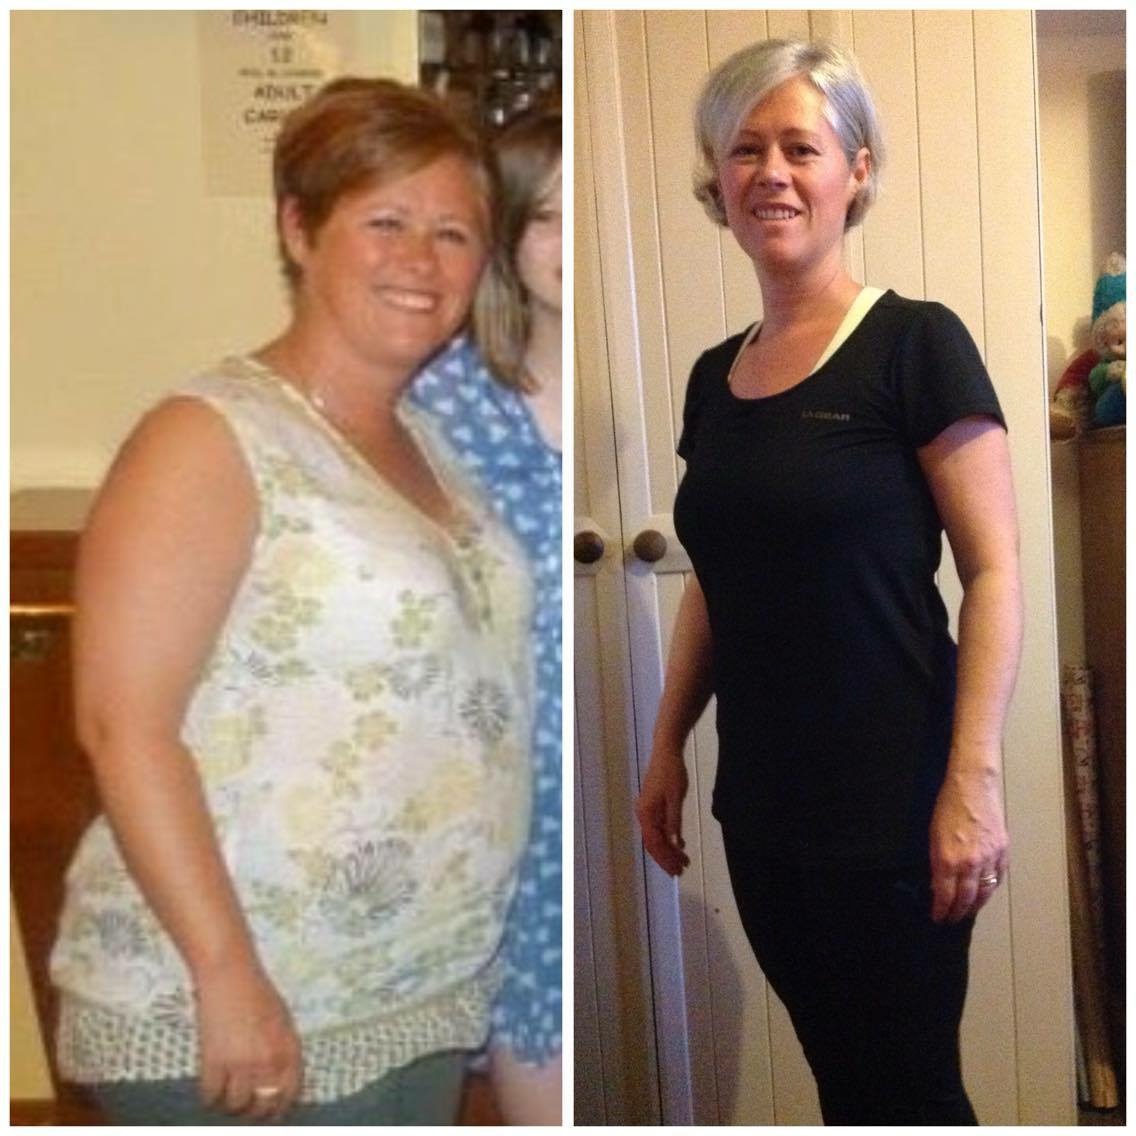 Kellie goes from a size 18 to size 10 with KSFL - Kick Start Fat Loss